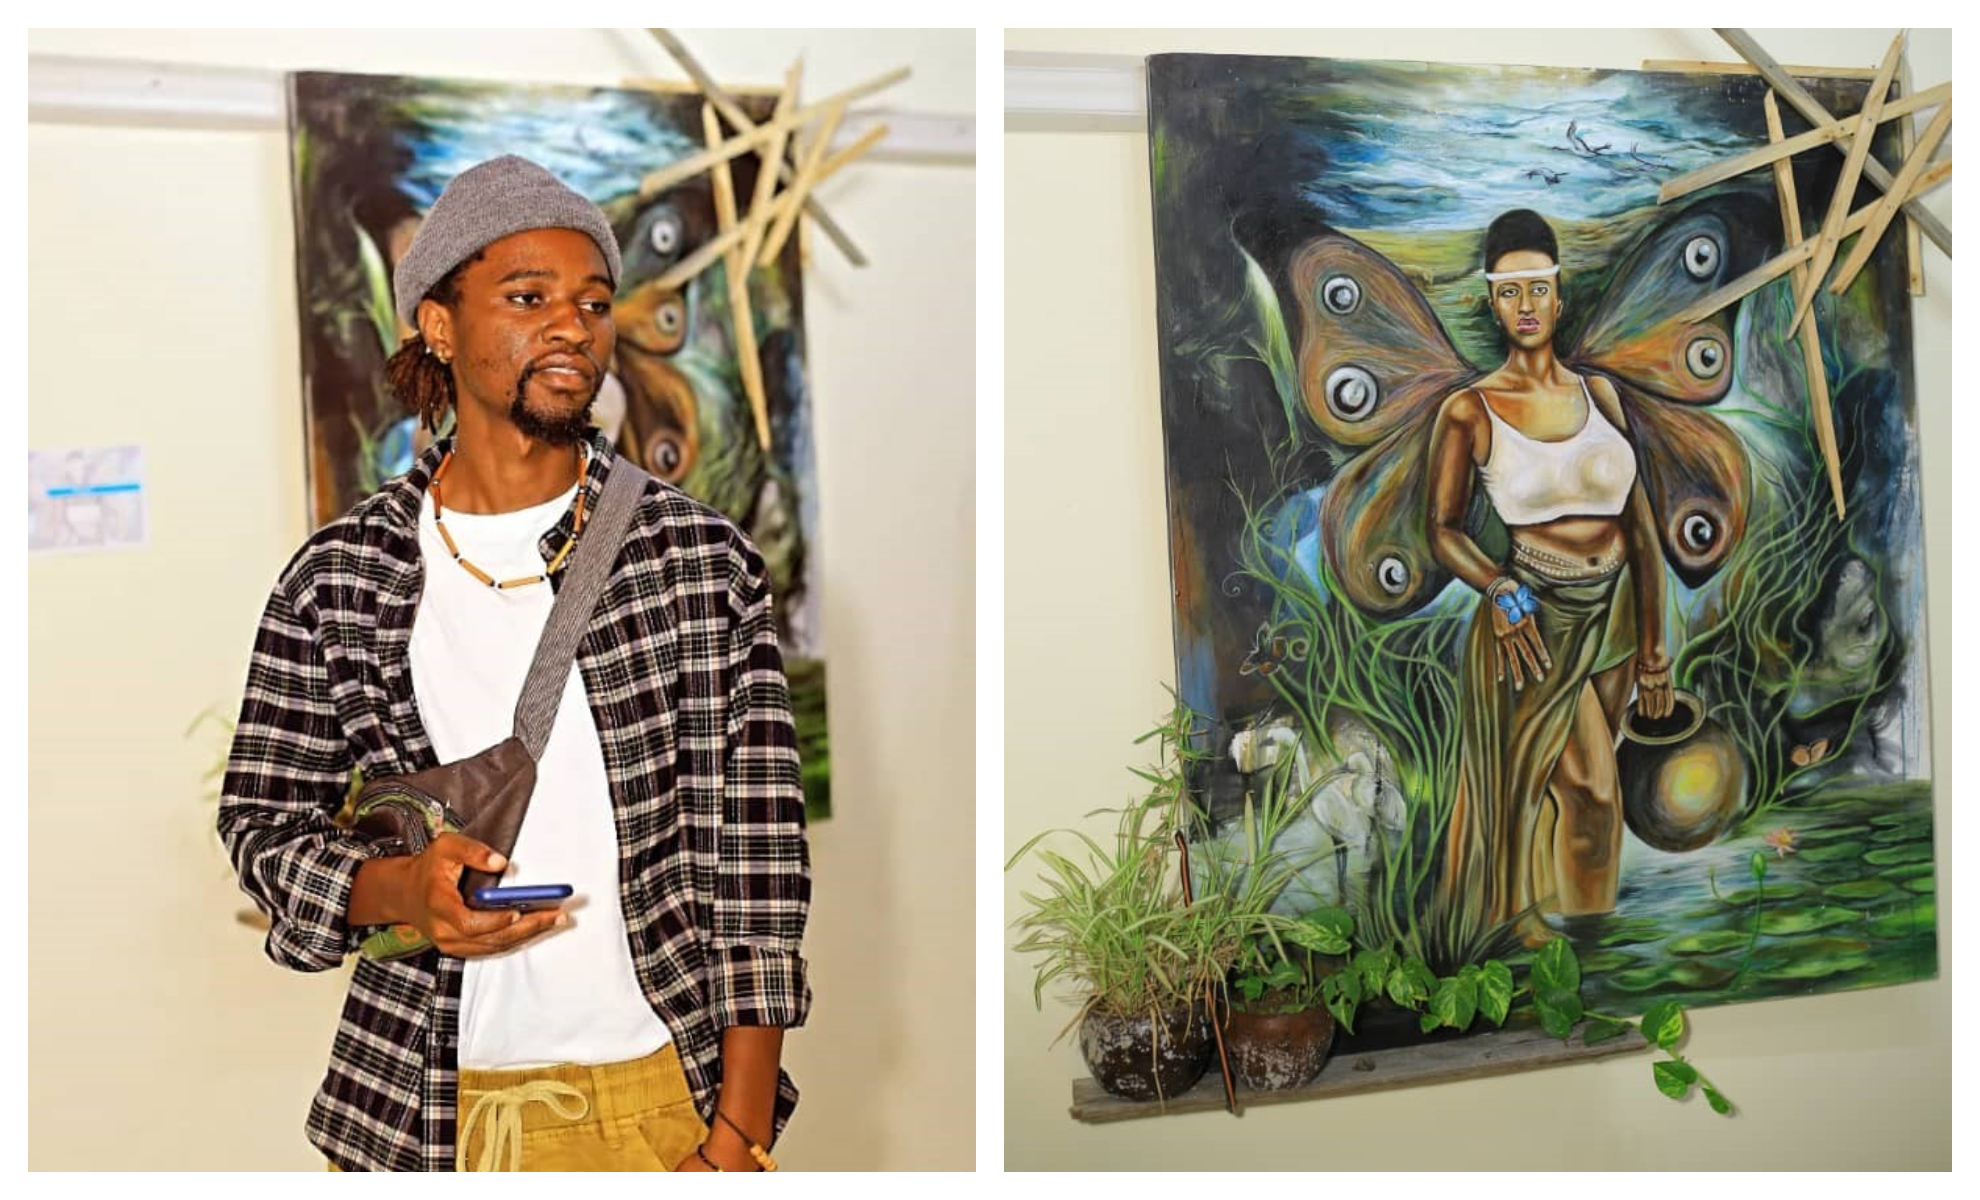 Lewis Manishimwehas organised a solo art exhibition dubbed u2018u2018Divine Feminineu2019u2019 at Kigali Soul Art gallery, that aims to honour womenu2019s power, celebrate their beauty and encourage them. Photos/ Courtesy.